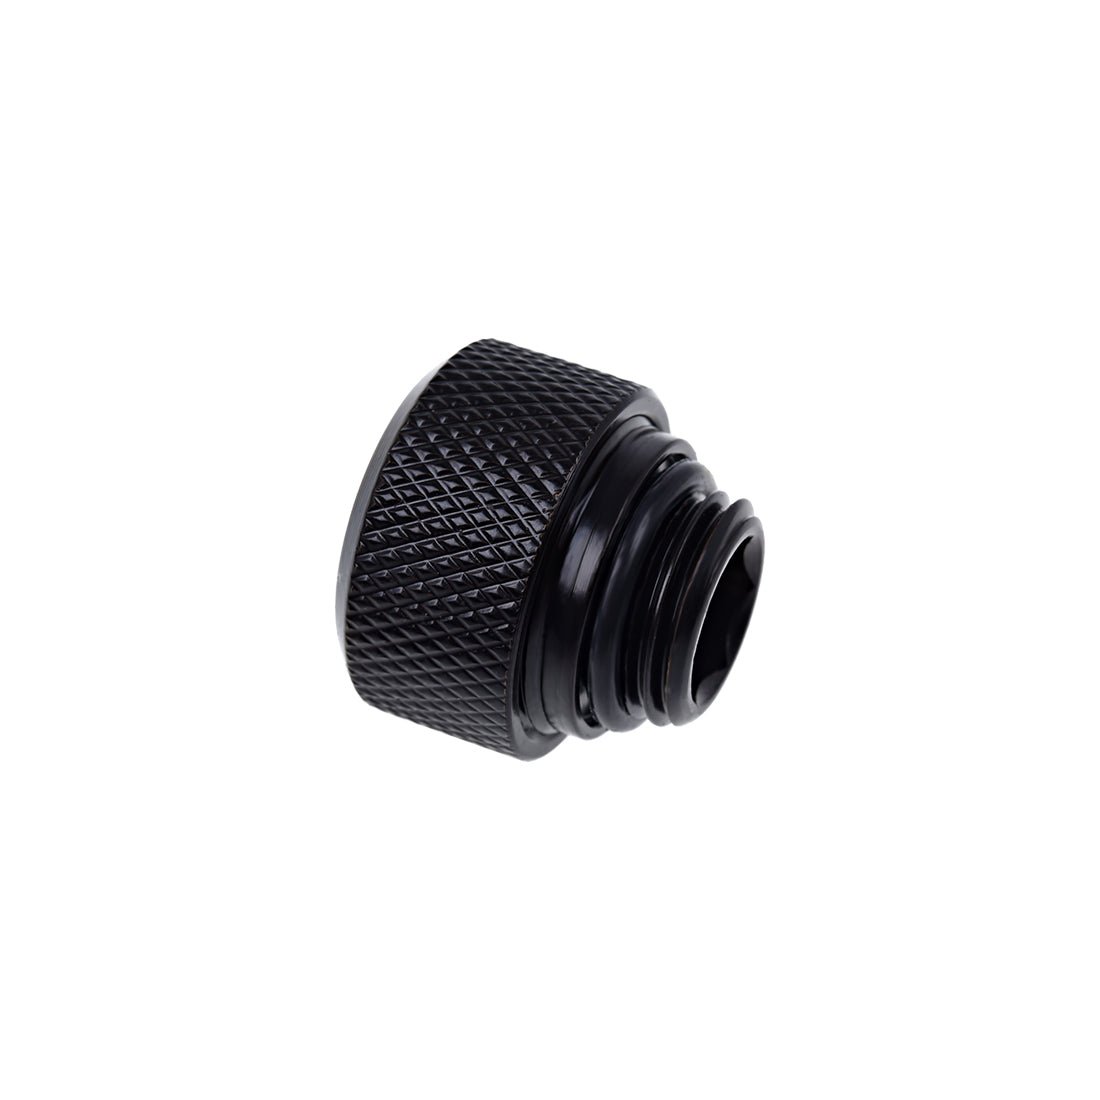 Alphacool Eiszapfen 13mm HardTube compression fitting G1/4 - knurled - Deep Black - Store 974 | ستور ٩٧٤